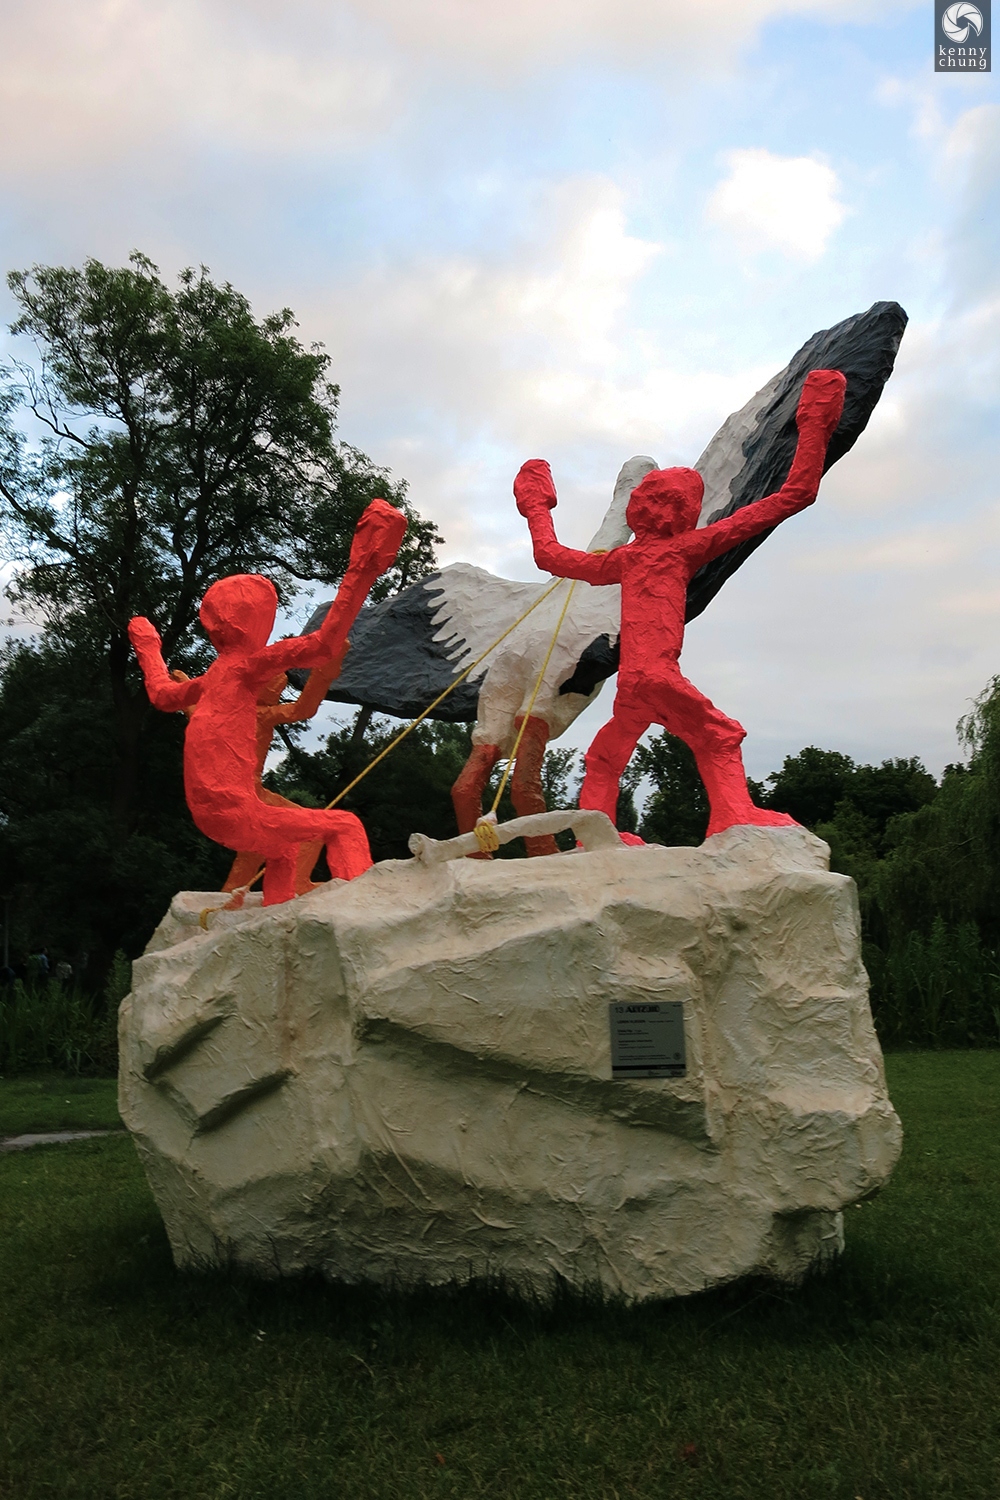 A sculpture of two red people dancing with a bird on a rock in Vondelpark